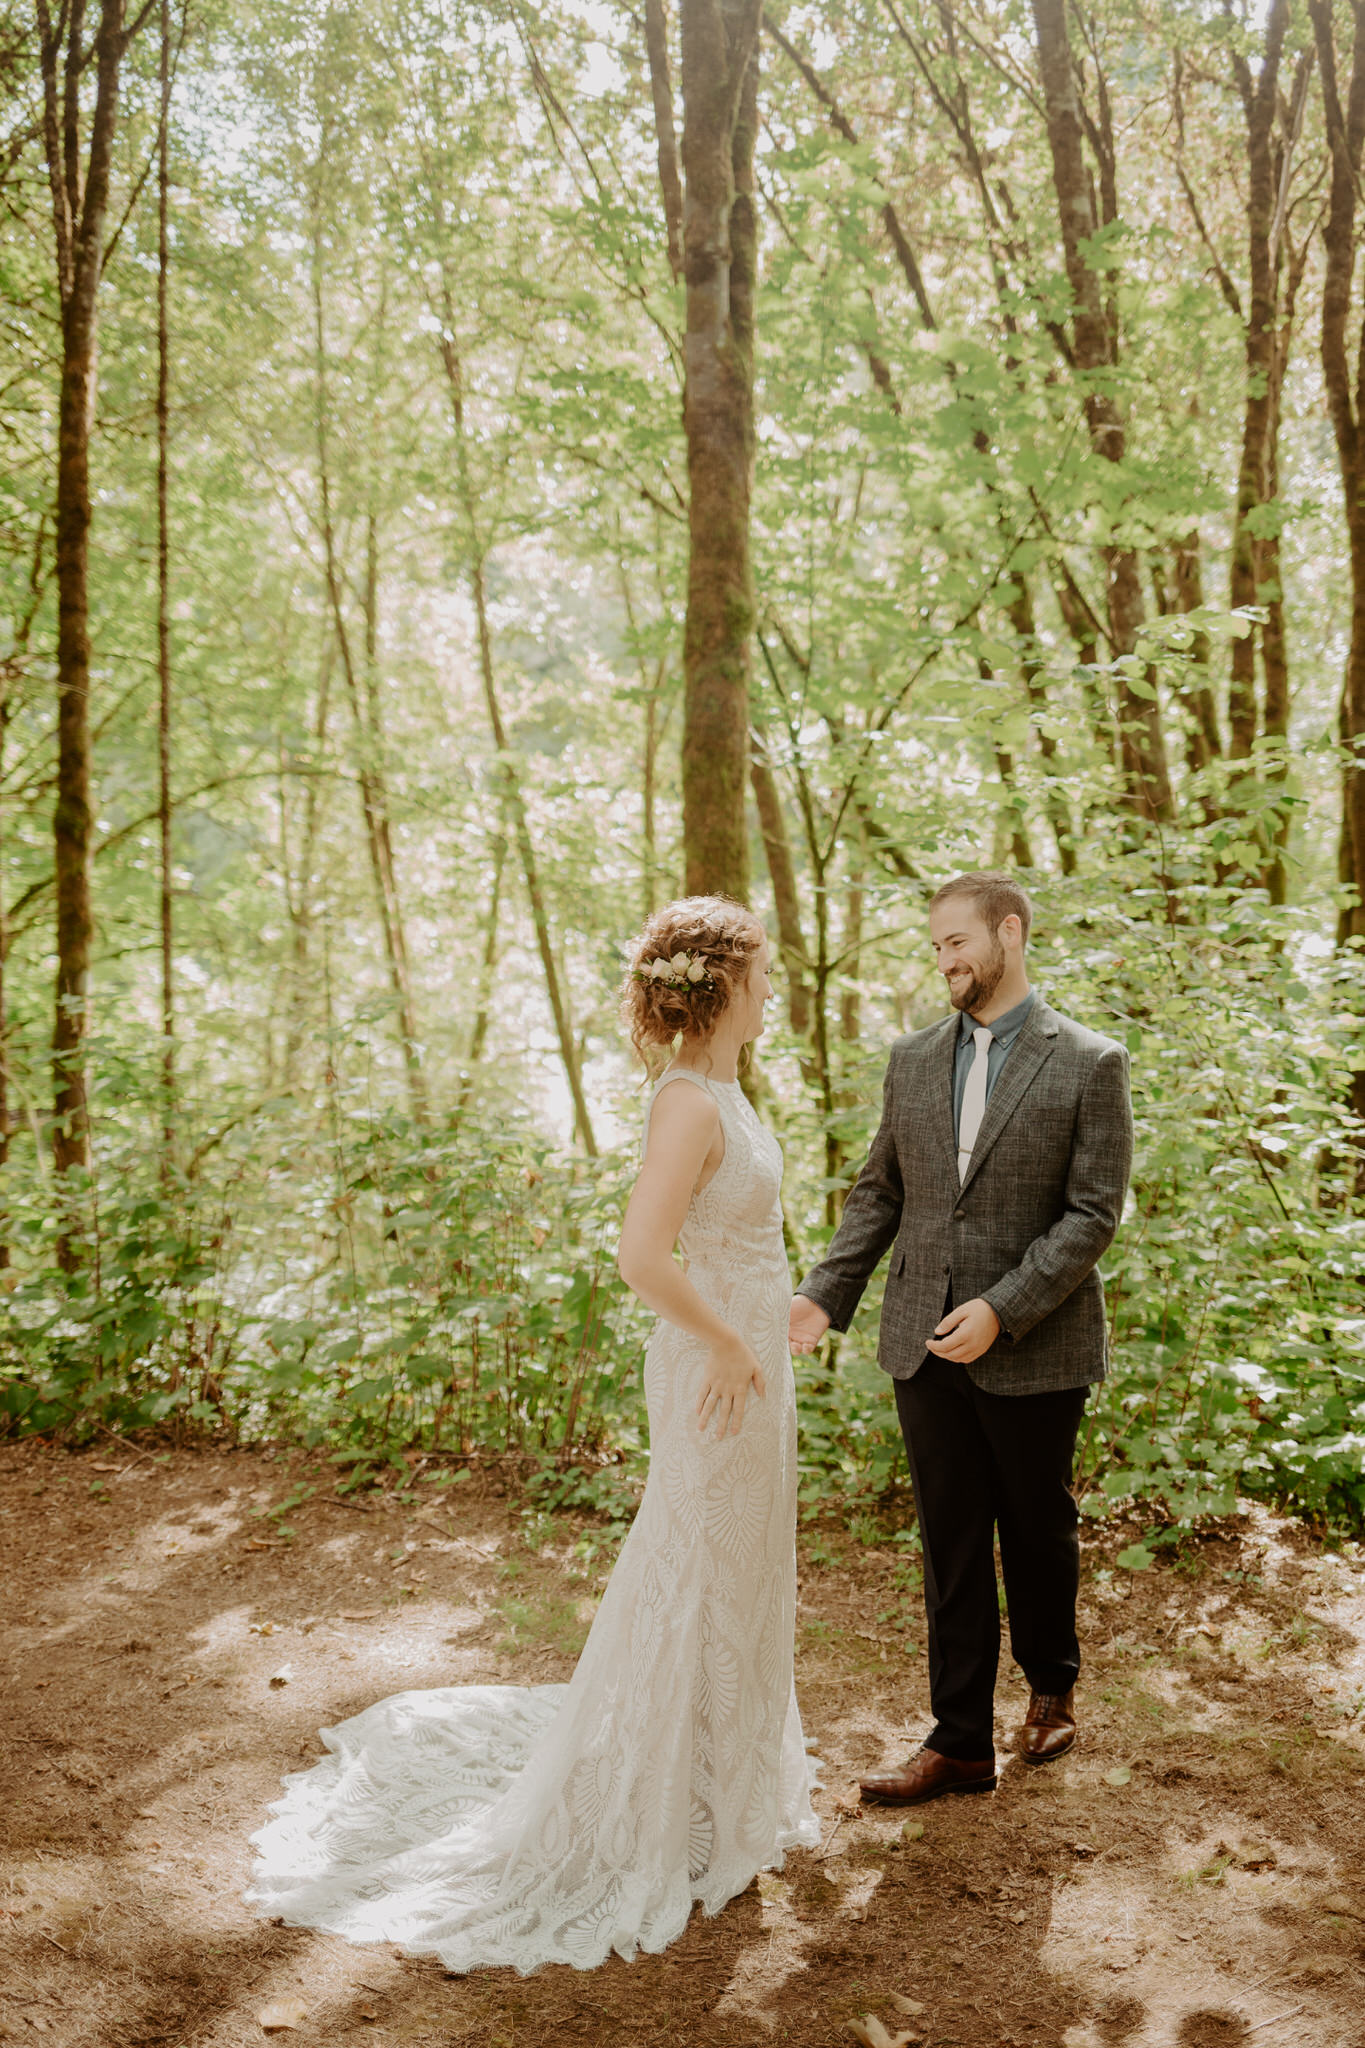 Presley & Eric // Horning's Hideout Camp Wedding - Mecca R. Photography